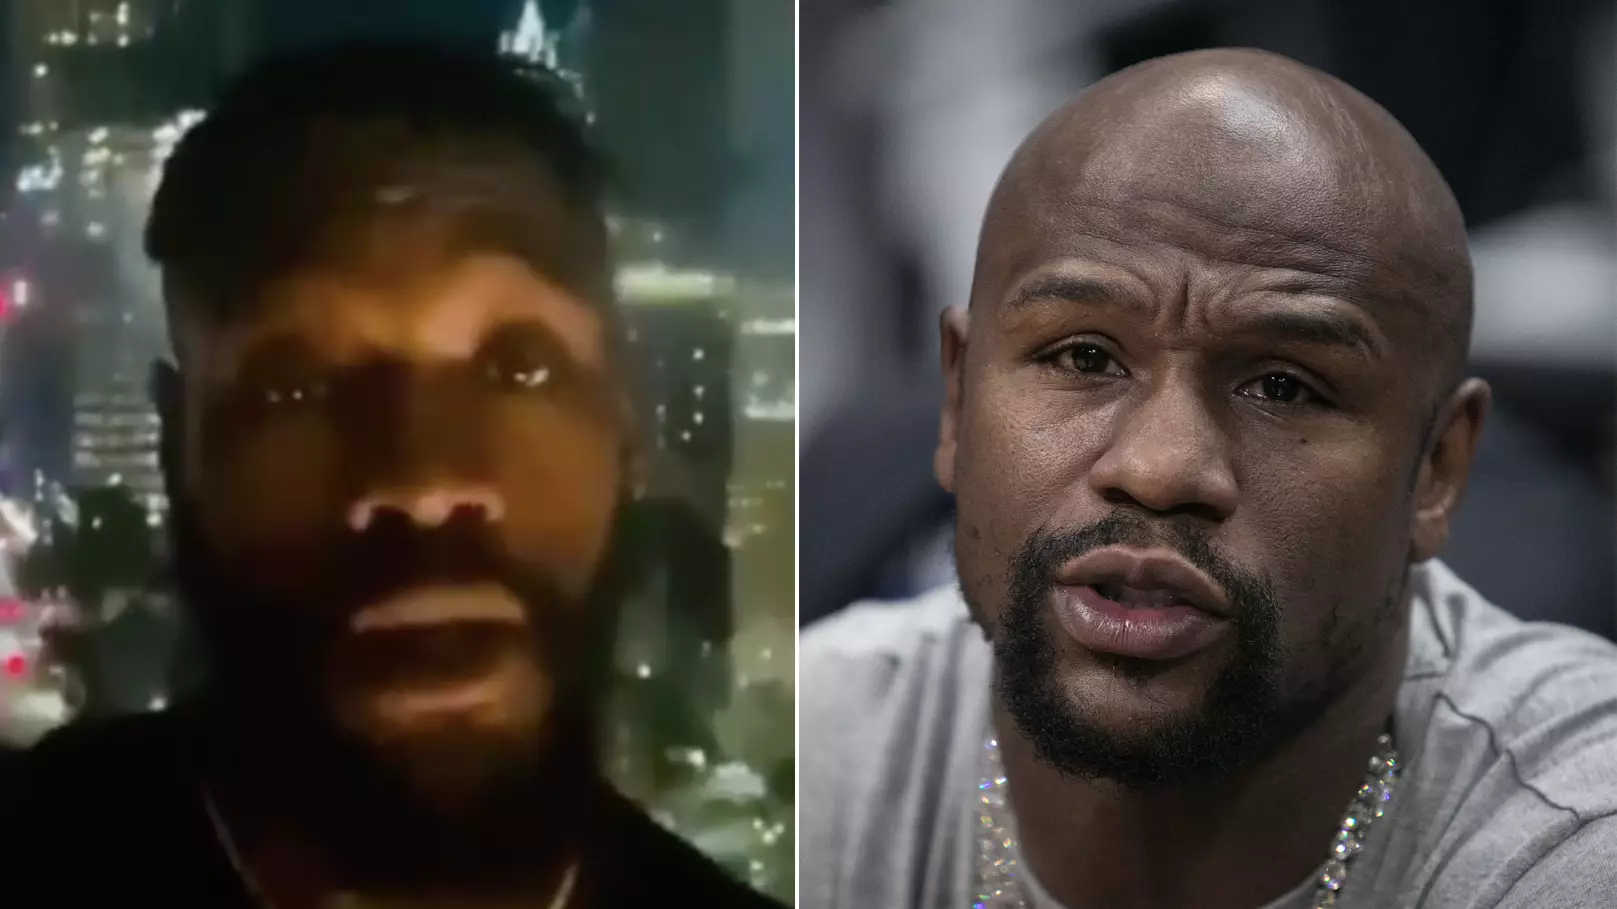 Deontay Wilder Responds To Floyd Mayweather's Offer To Train Him